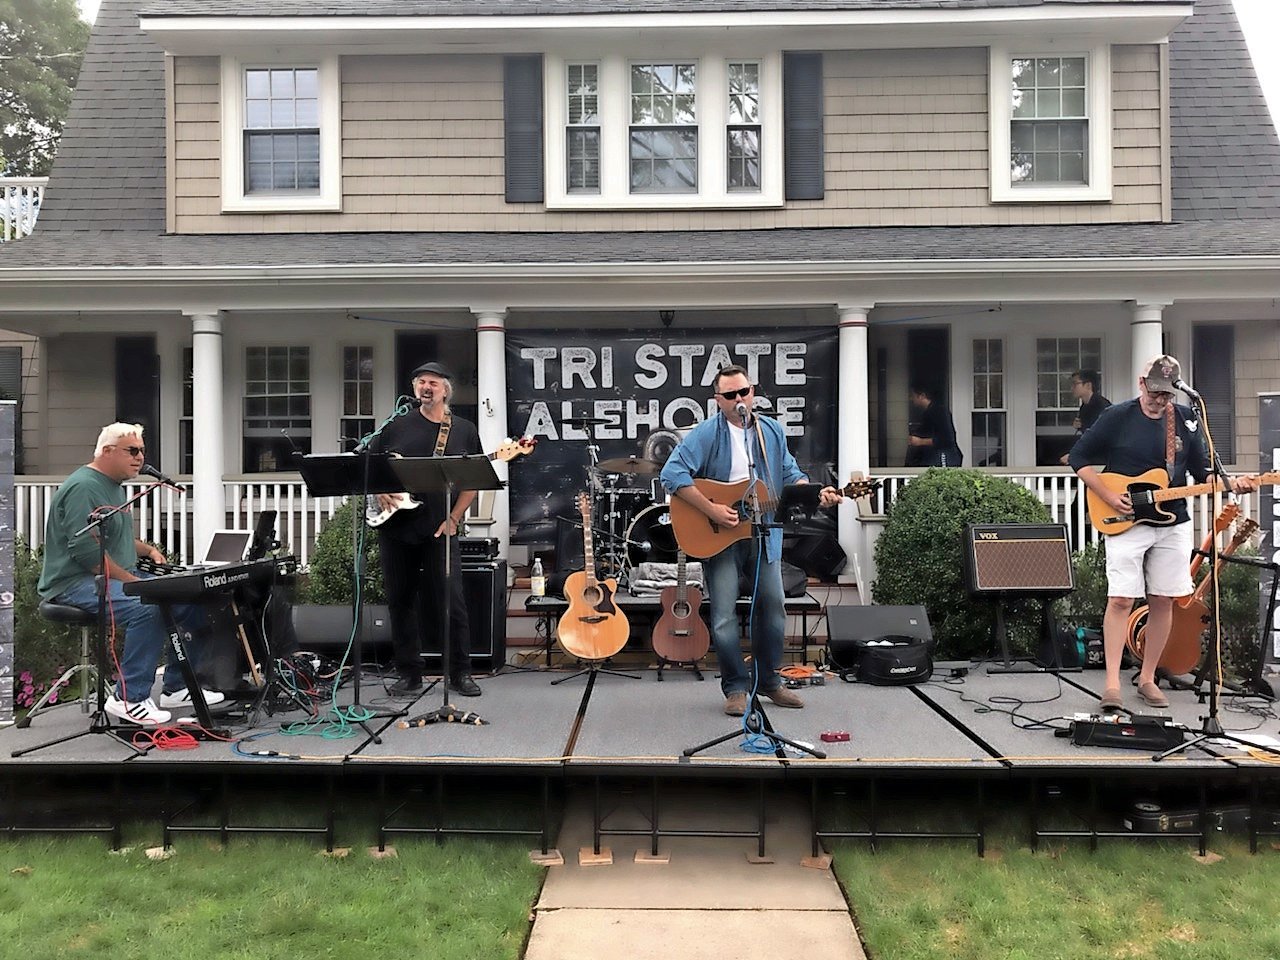 At last year’s inaugural Playing on the Porch, Tri State Alehouse performed on Pine Street.